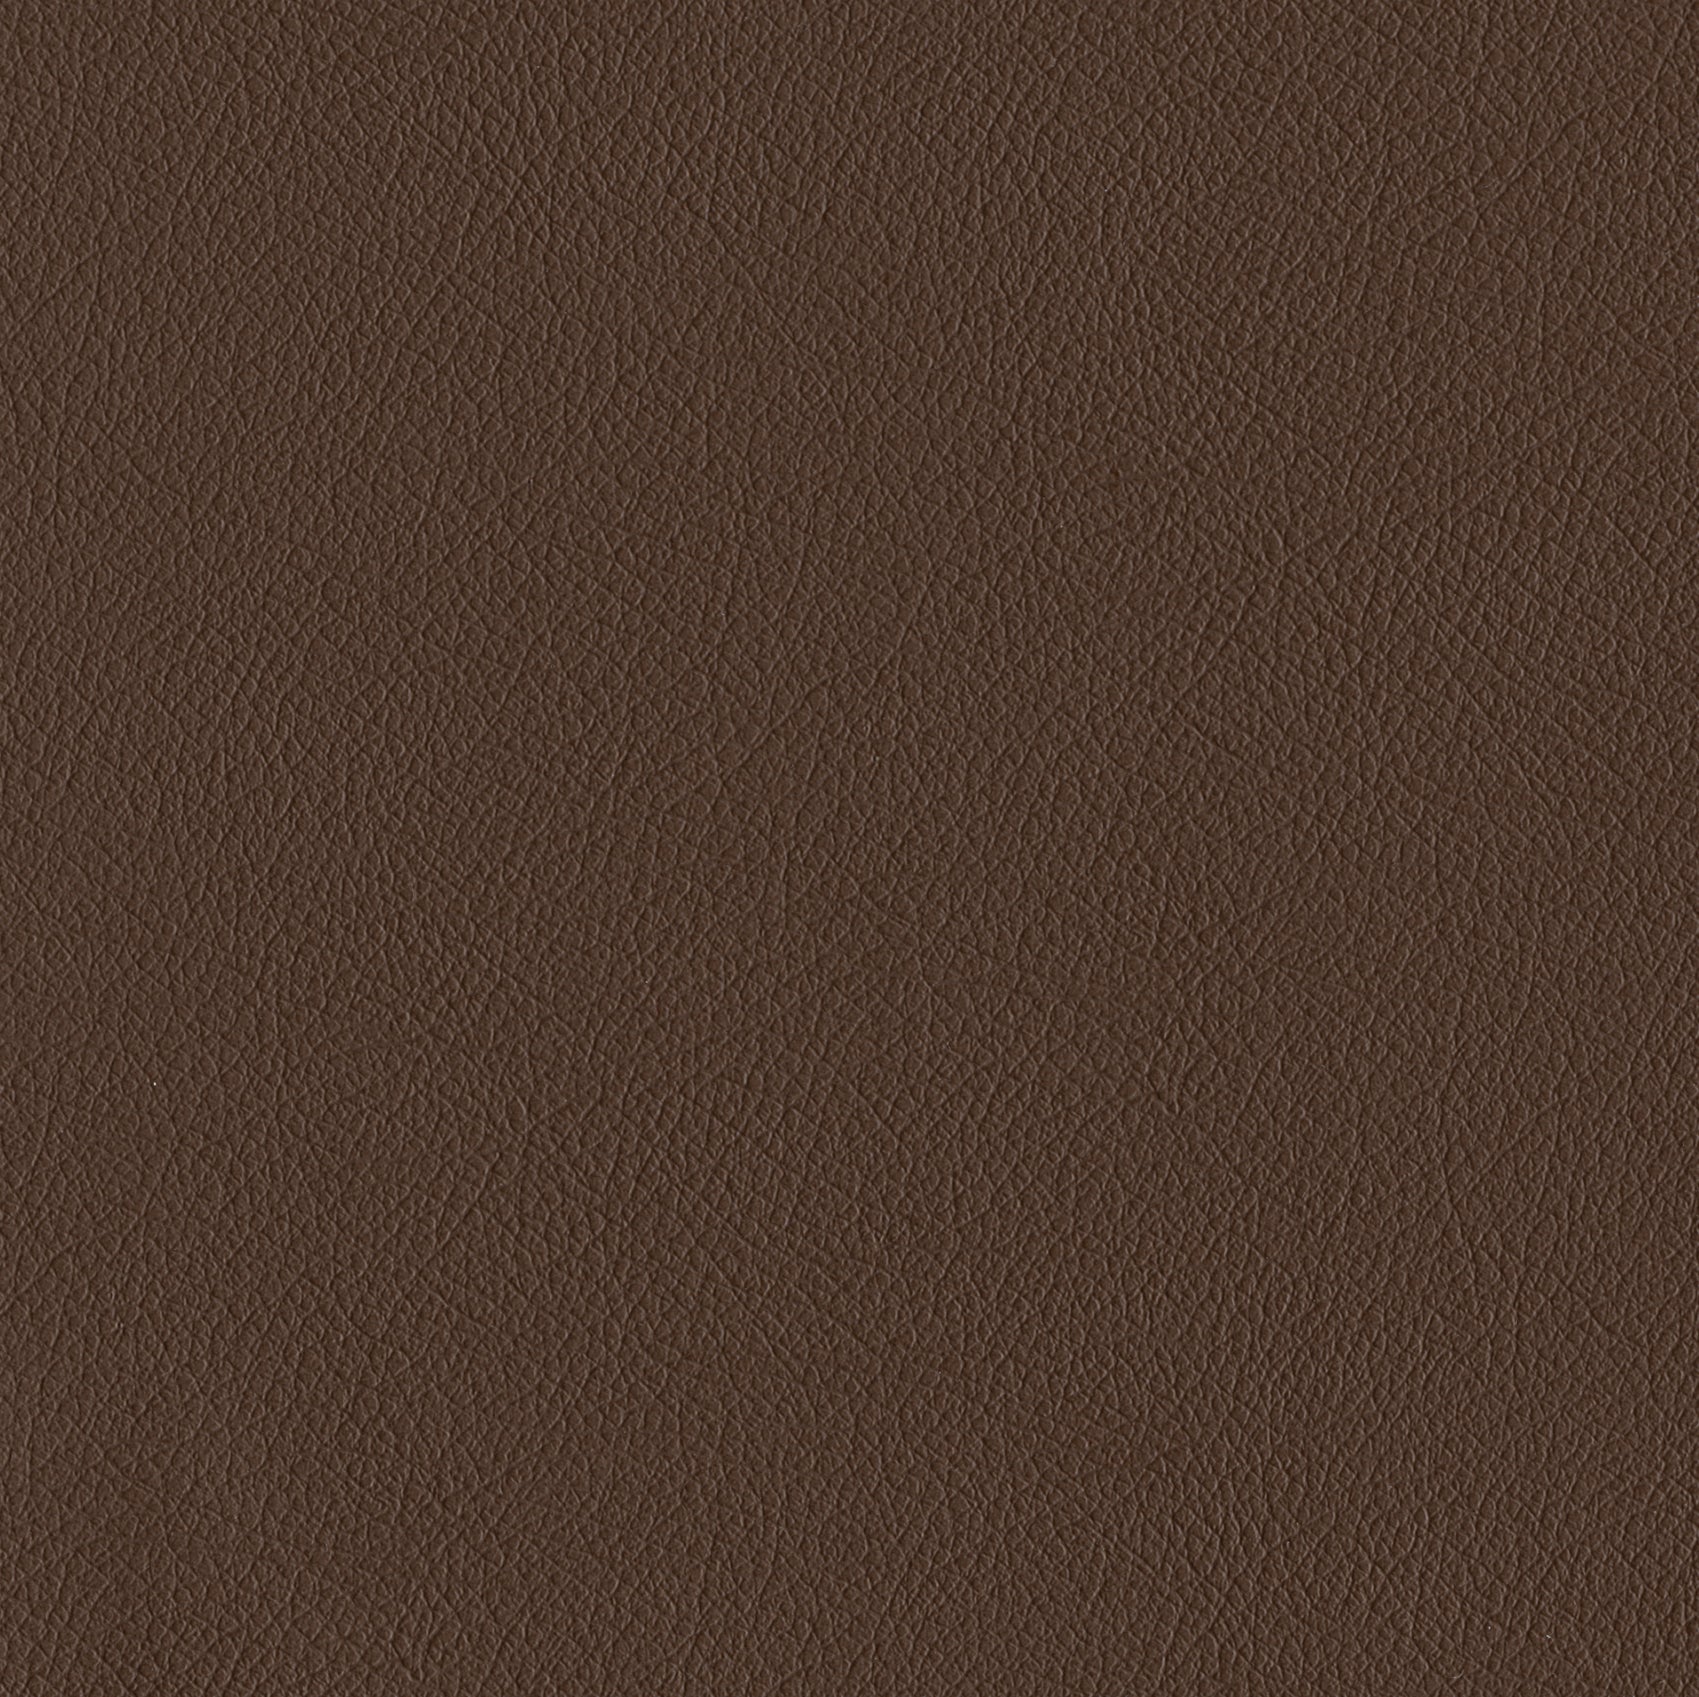    Andriali-Contract-Vinyl_Upholstery-Design-IconFR-Color-330Cocoa-Width-140cm